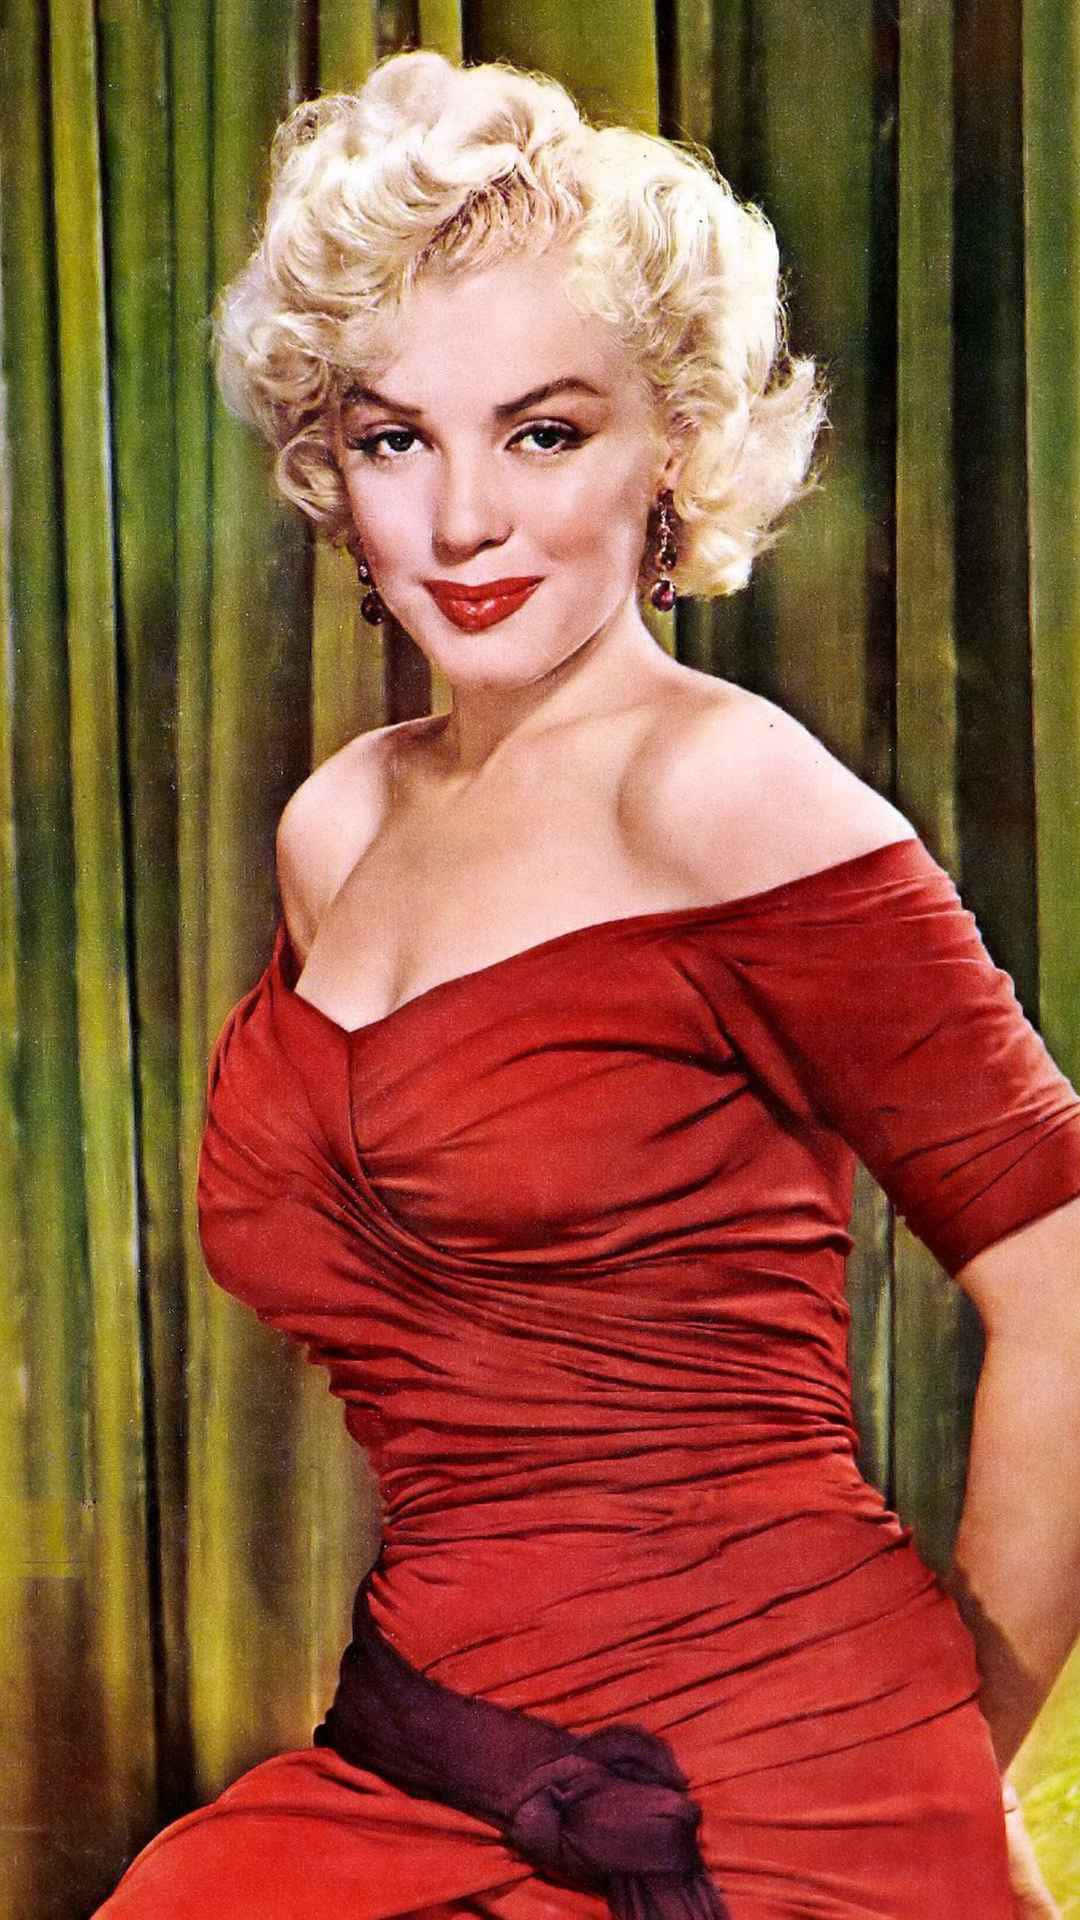 Enjoy the superstar style with the Marilyn Monroe Iphone Wallpaper